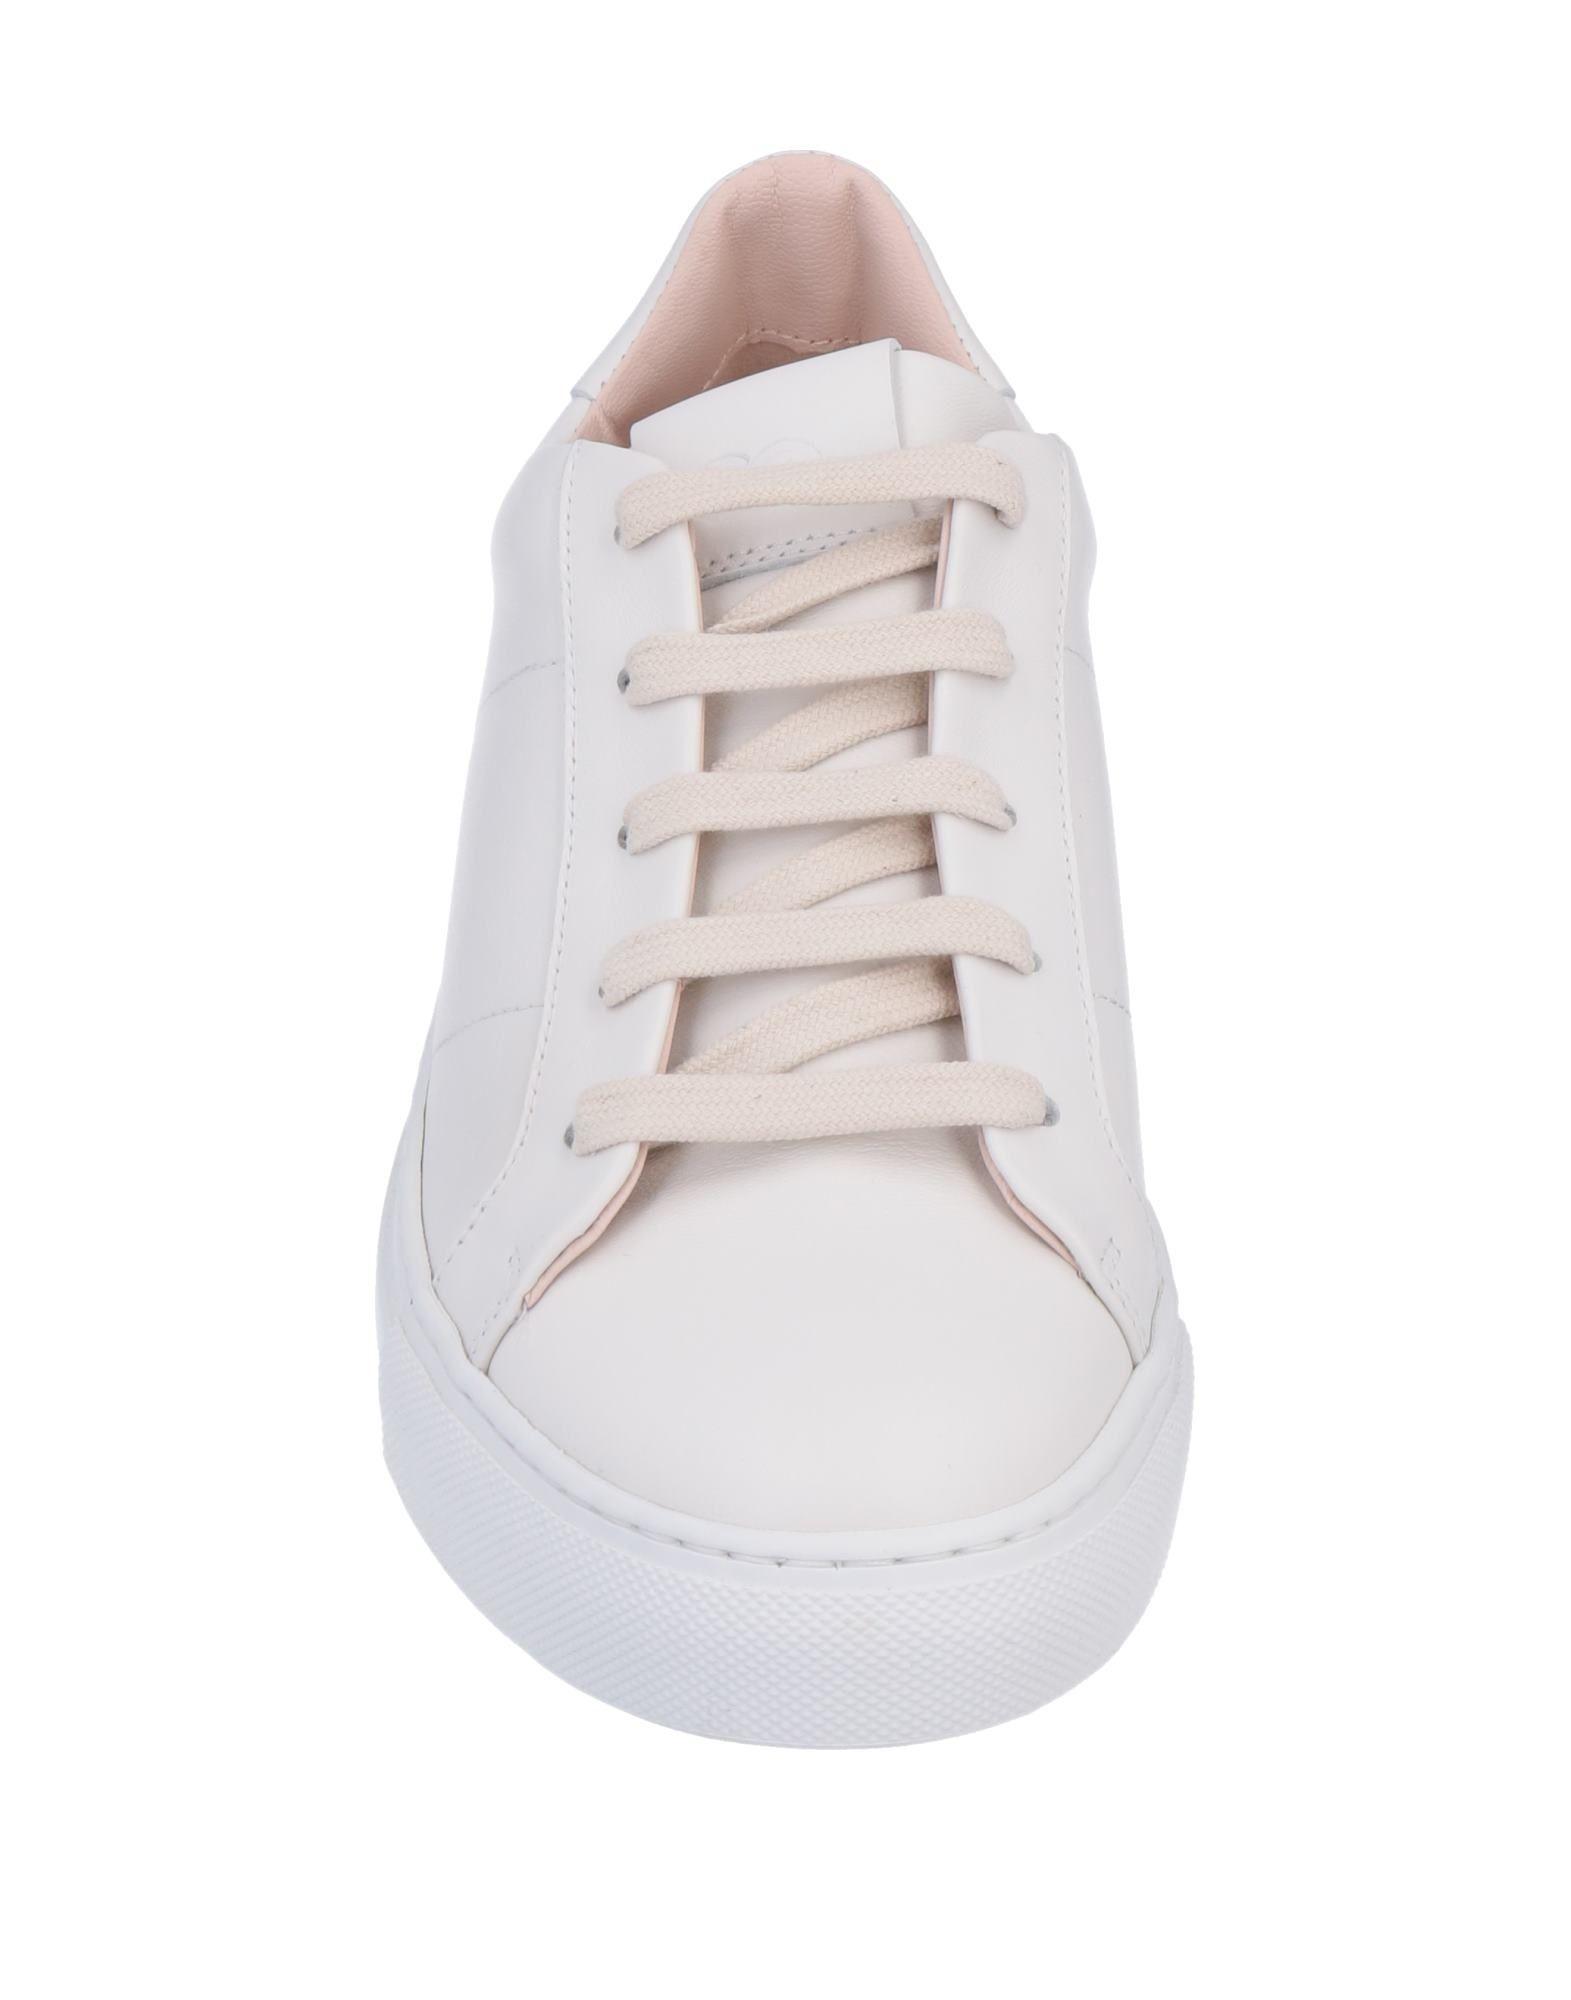 ESCADA Leather Sneakers in White - Lyst